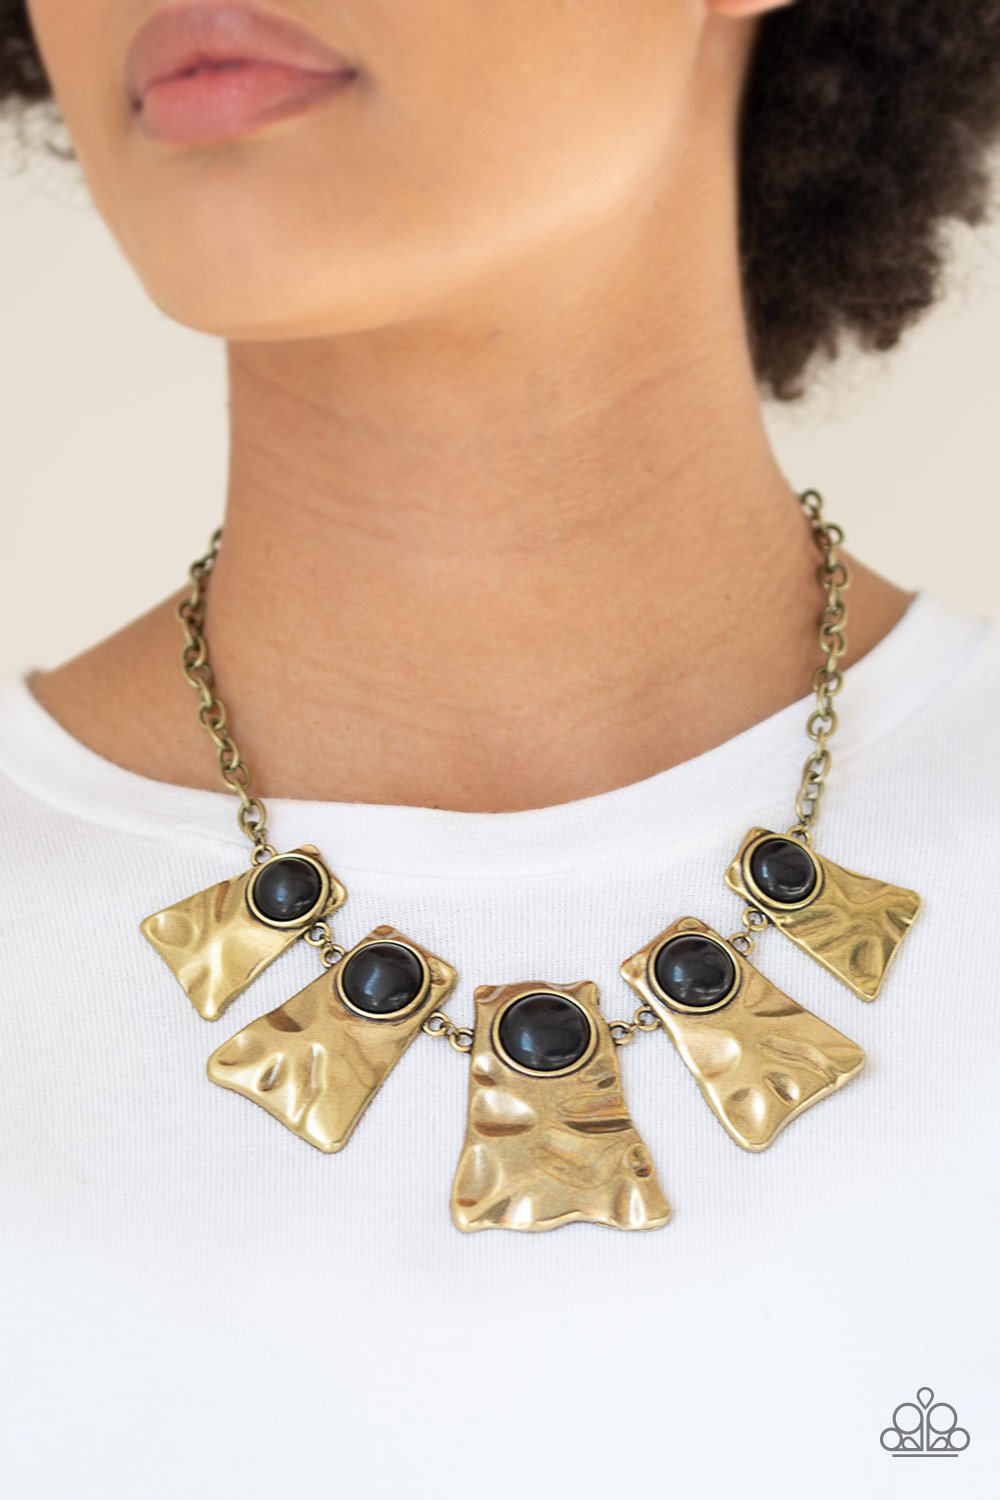 Cougar-brass-Paparazzi necklace